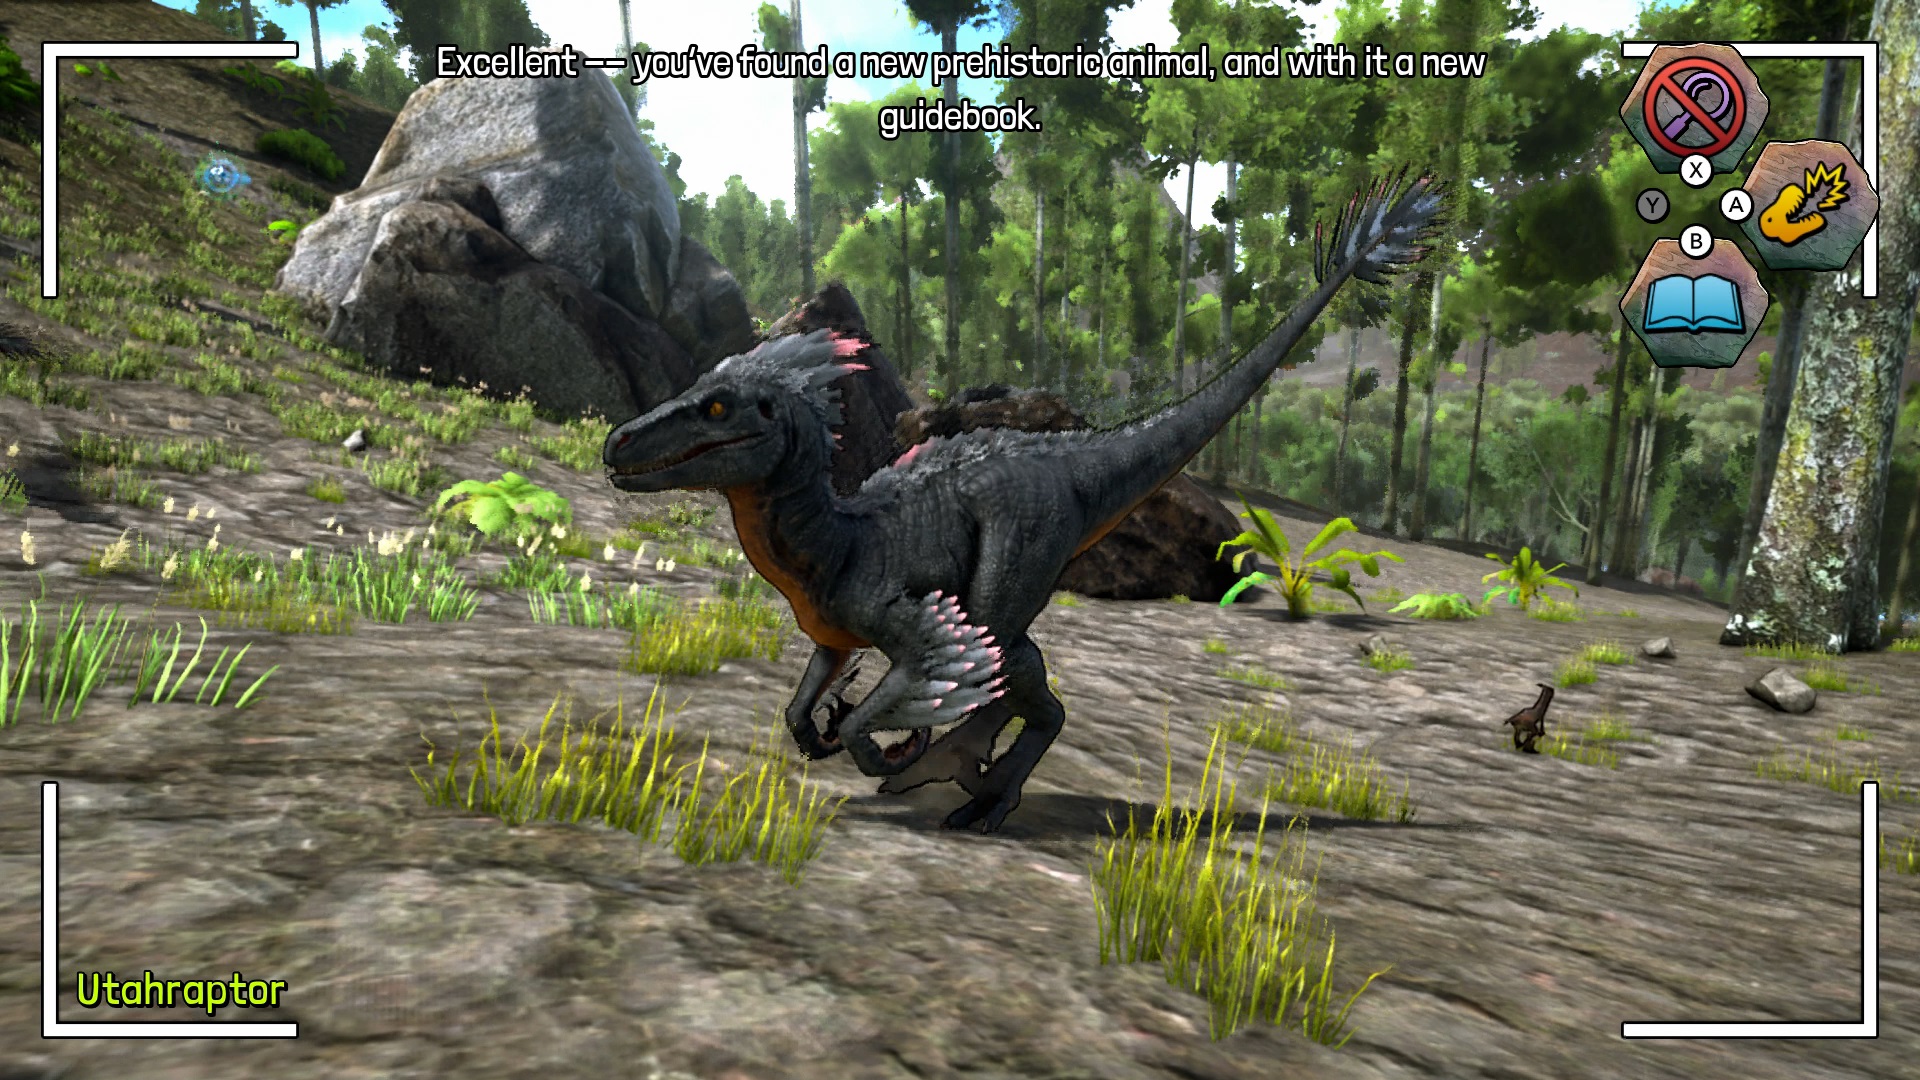 Kid-friendly Ark: Dinosaur Discovery gets a big update